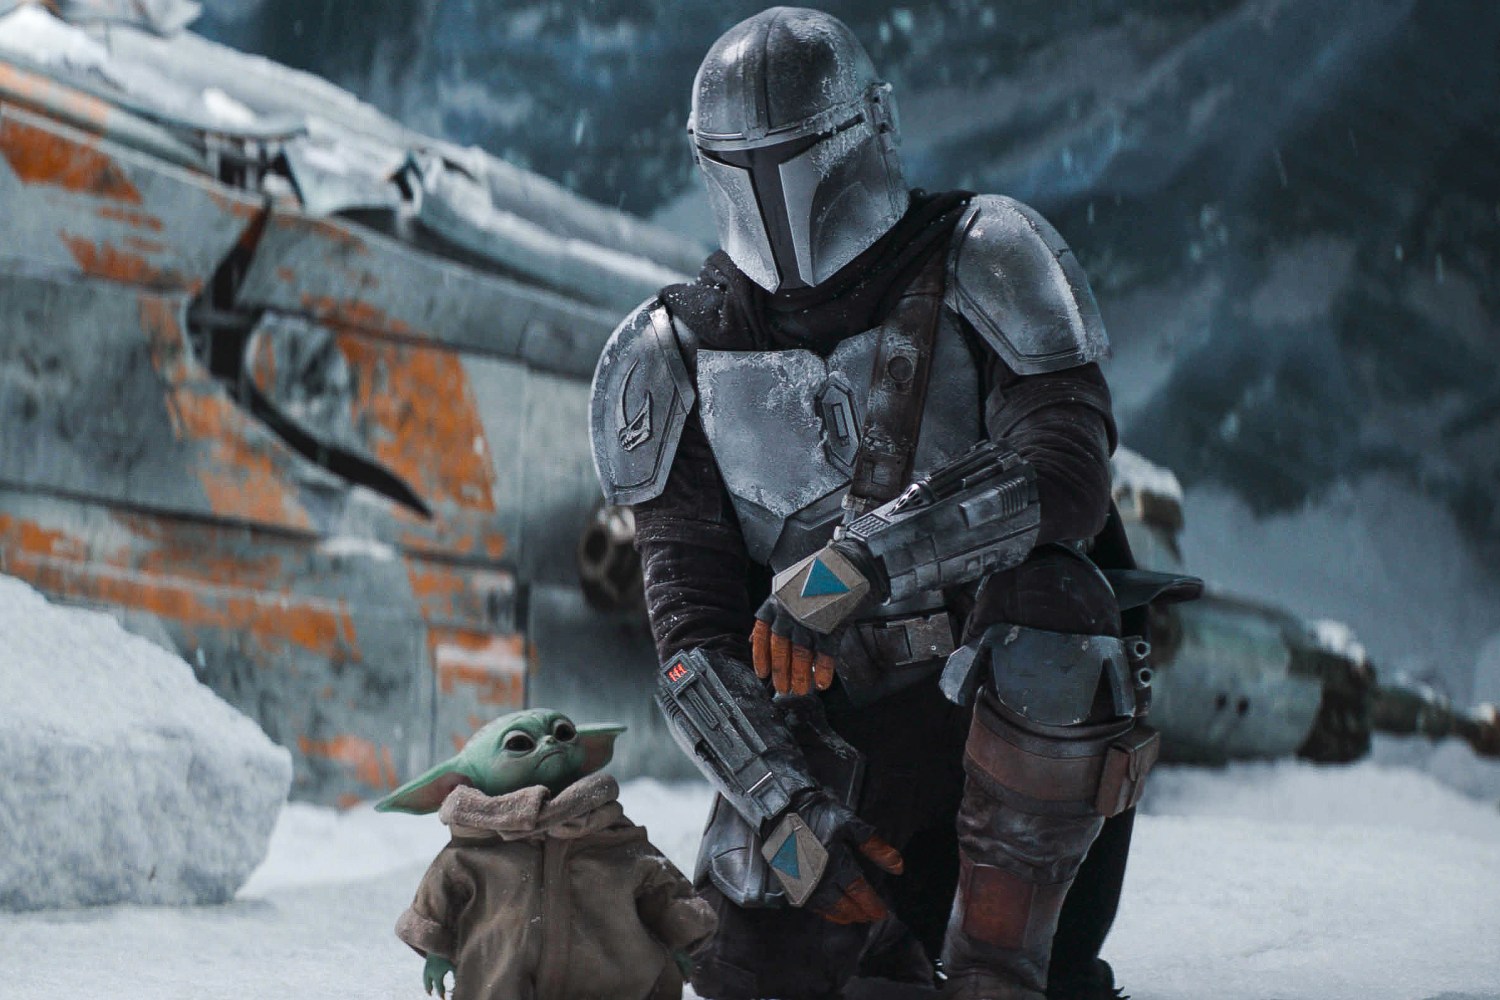 A new 'Star Wars' movie is coming to theaters: 'The Mandalorian & Grogu